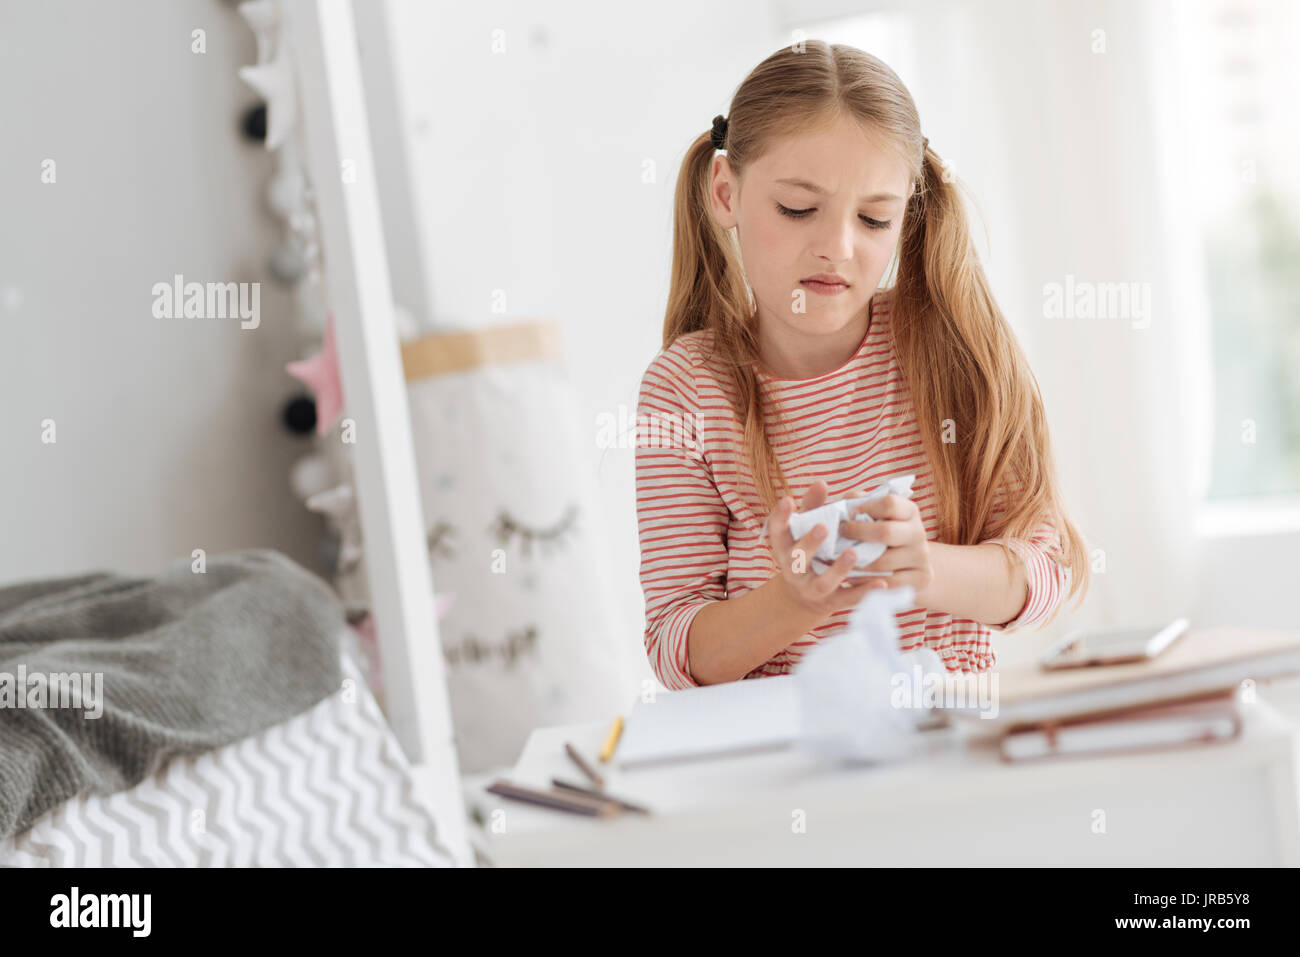 Angry young lady holding crumpled paper while studying Stock Photo